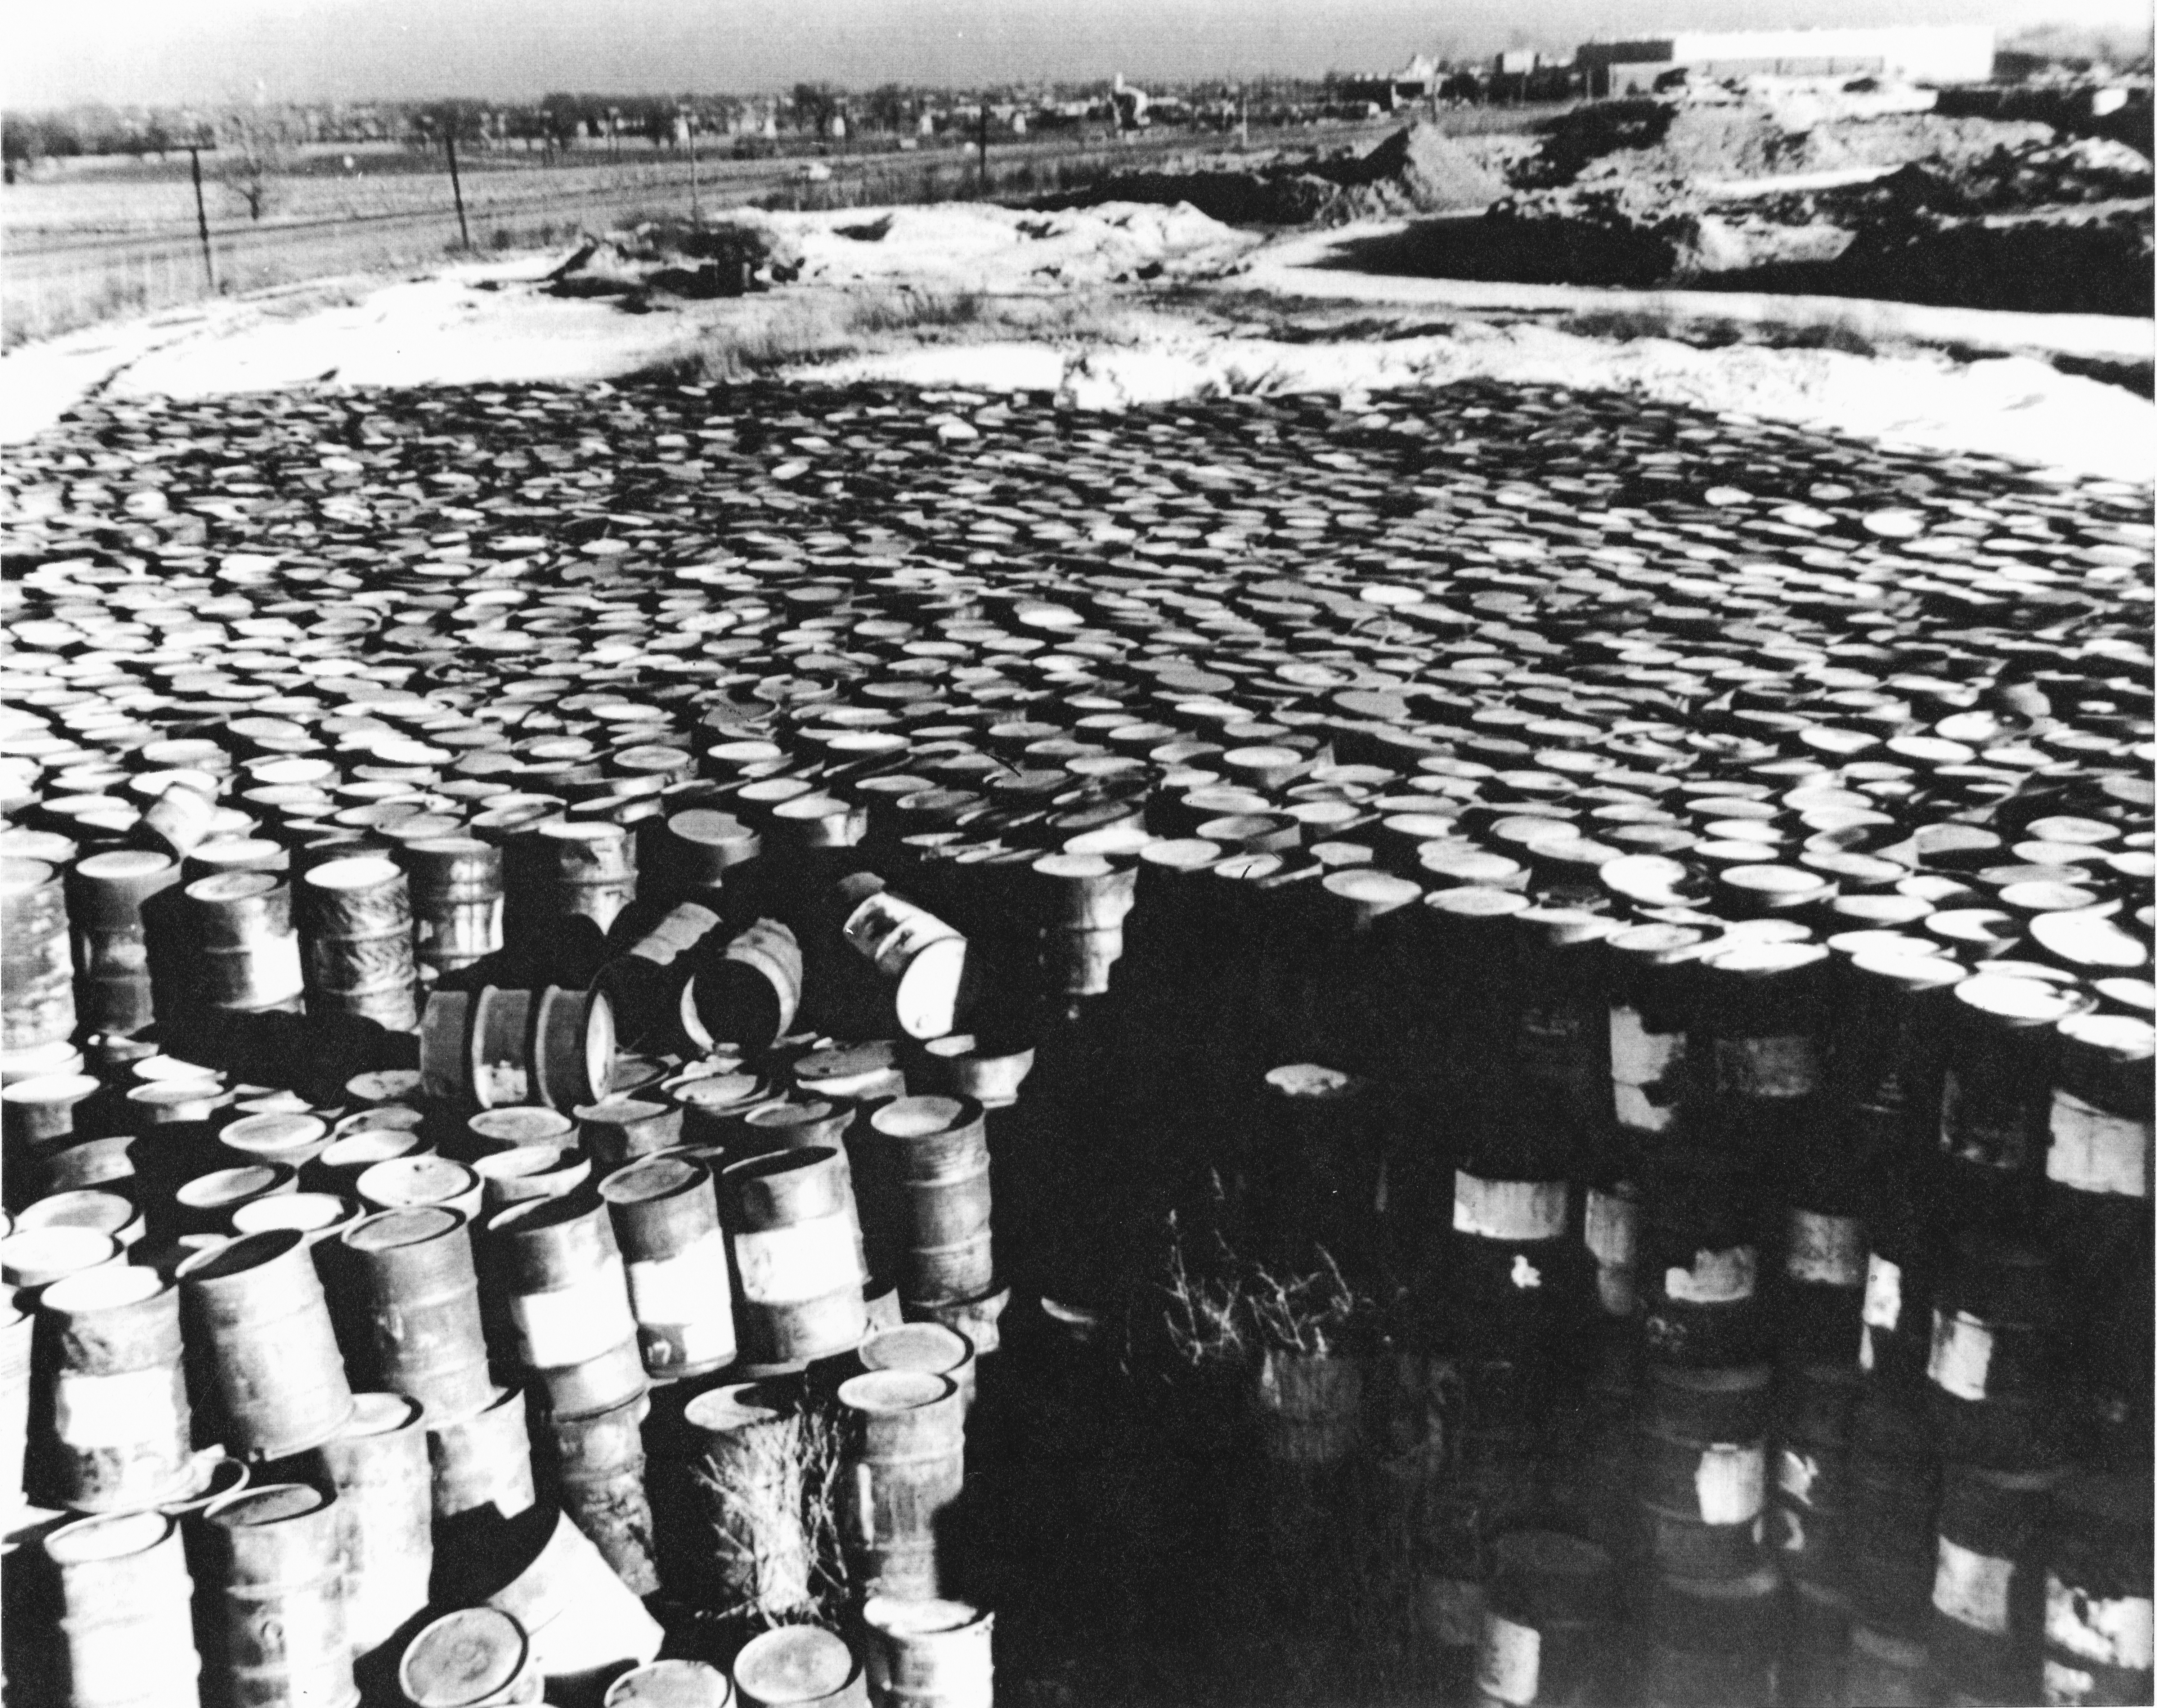 A photo taken in 1960 of deteriorating steel drums containing radioactive residues near Coldwater Creek, by the Mallinckrodt-St. Louis Sites Task Force Working Group. (State Historical Society of Missouri, Kay Drey Mallinckrodt Collection, 1943-2006.)